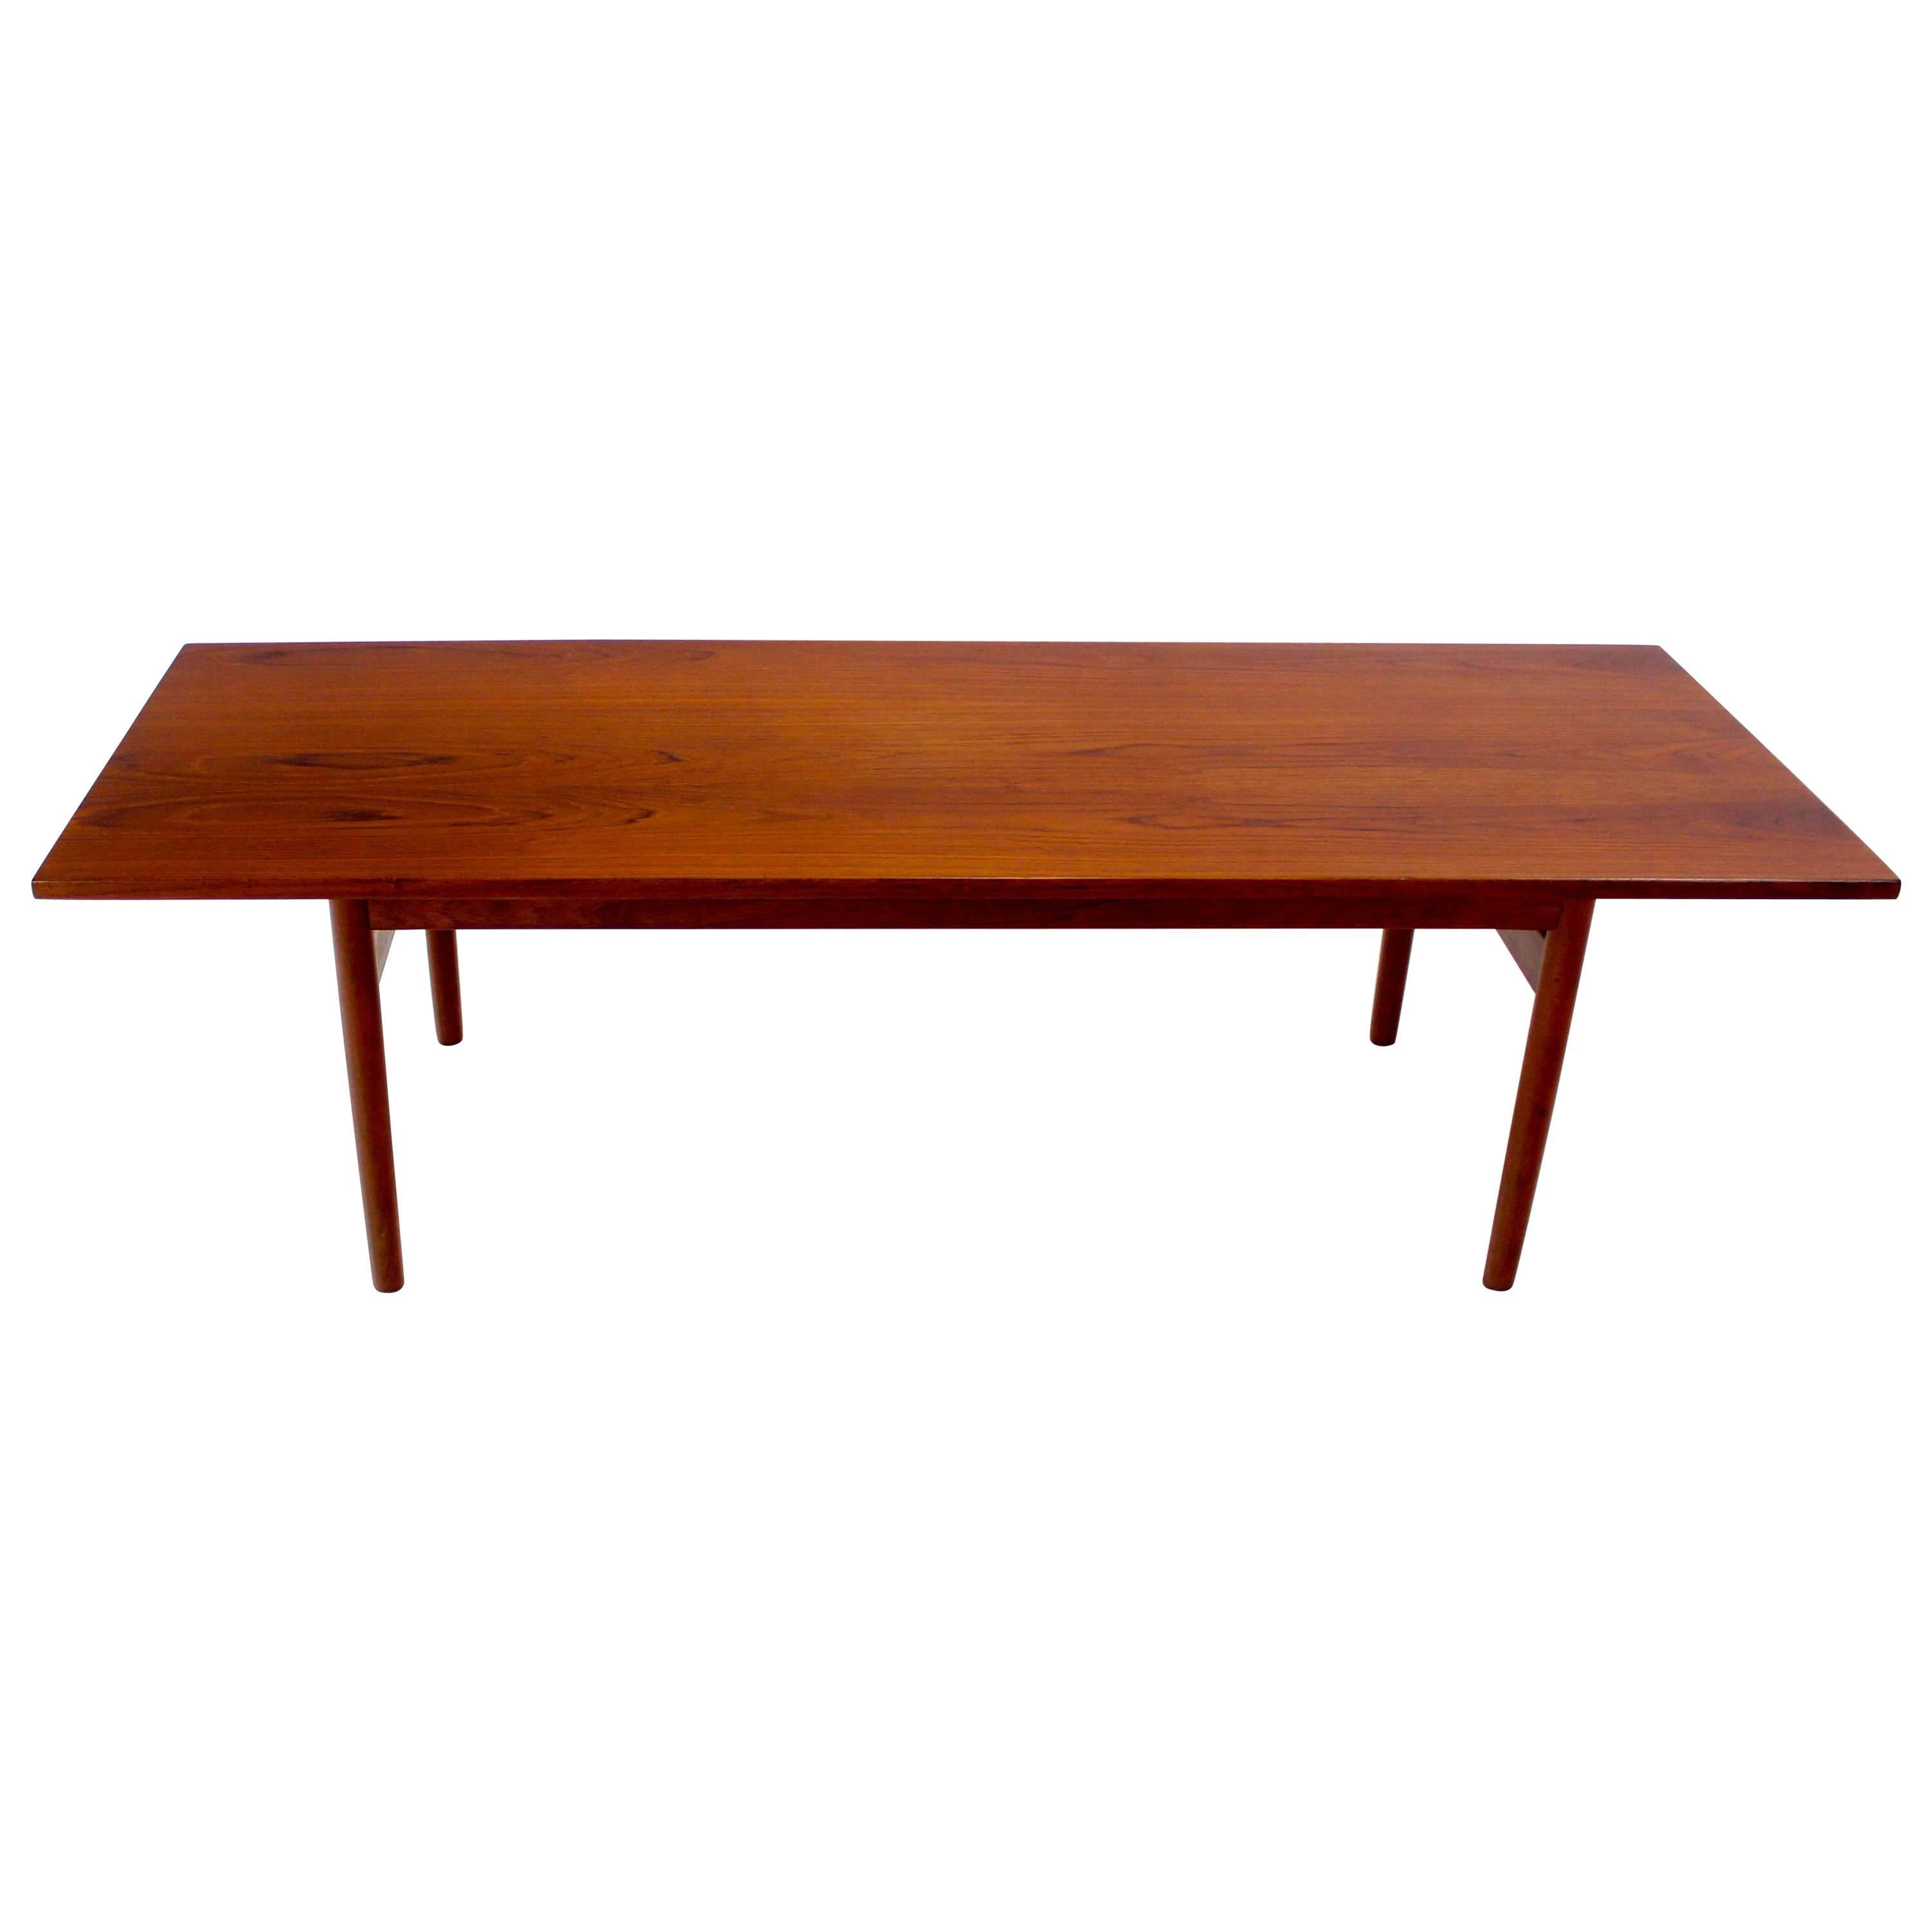 Classic Danish Modern Teak Coffee Table Designed by Grete Jalk For Sale